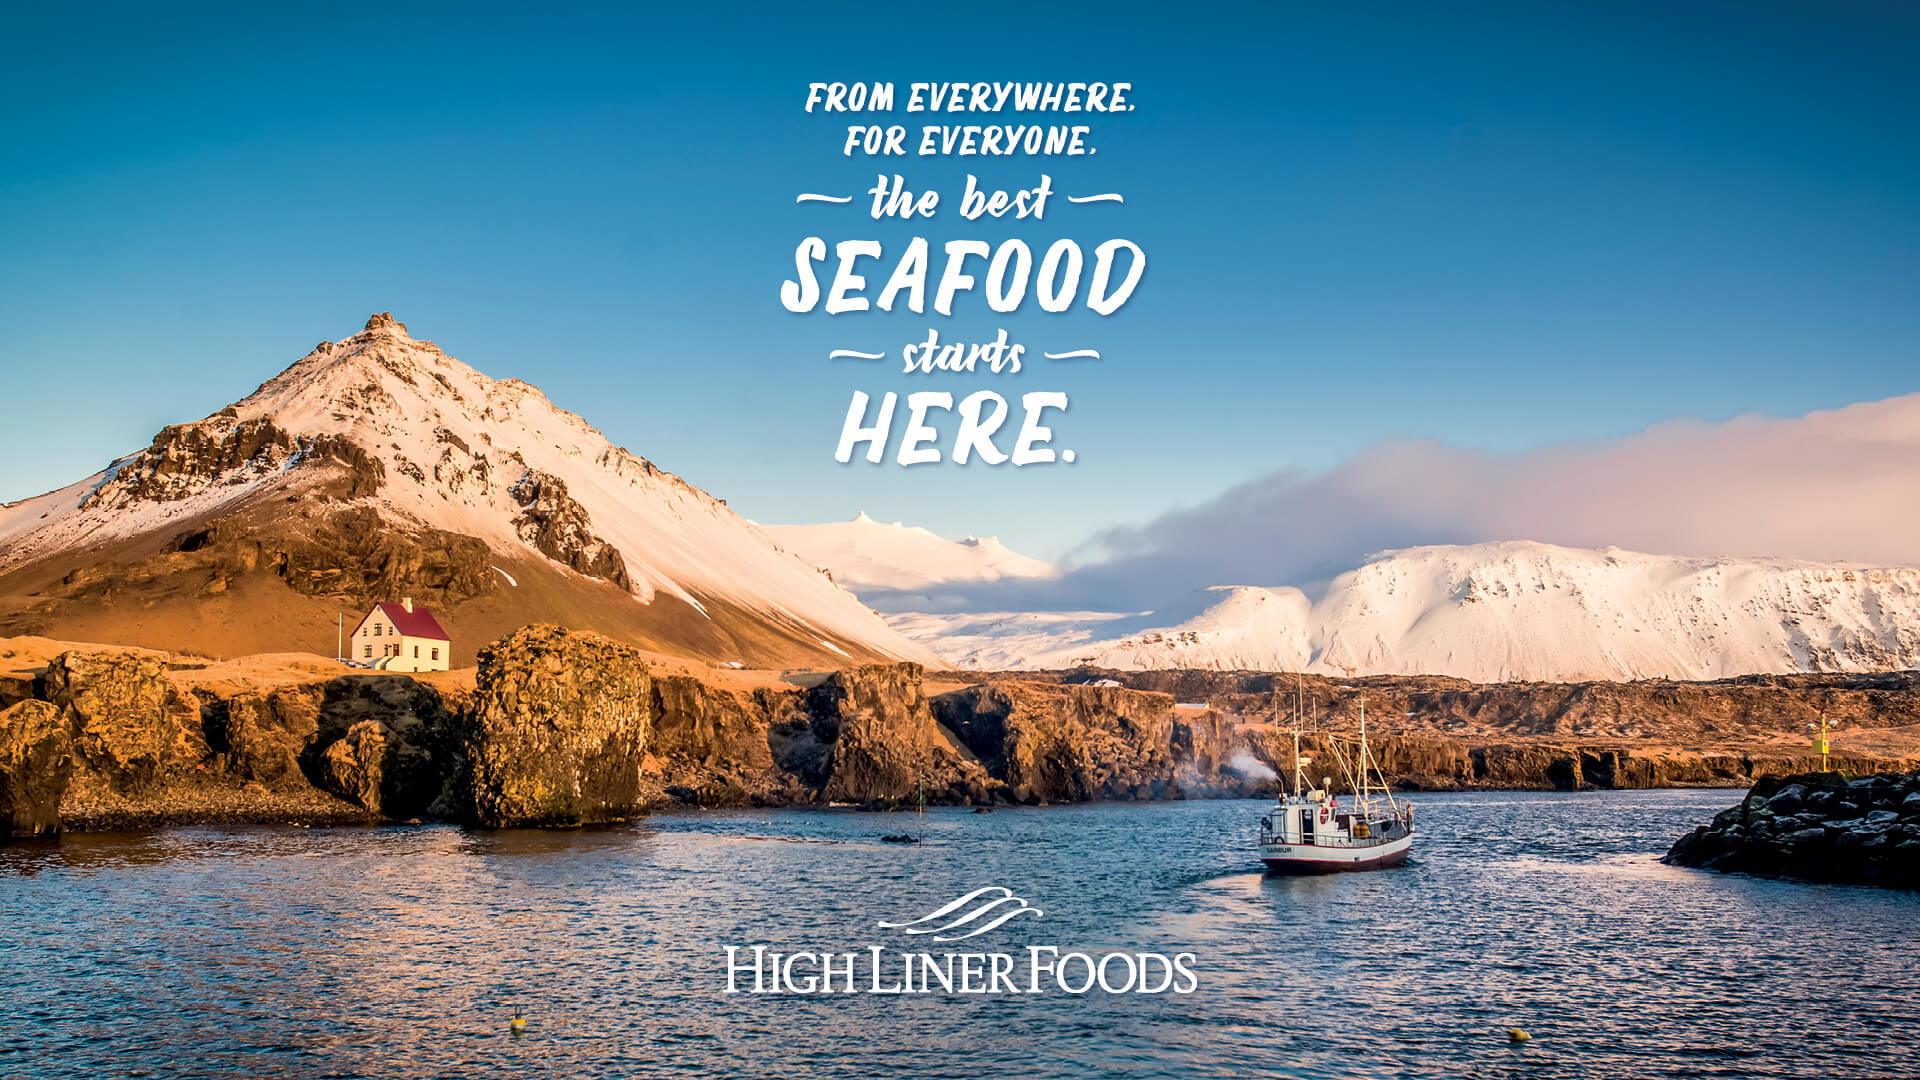 The best seafood starts here